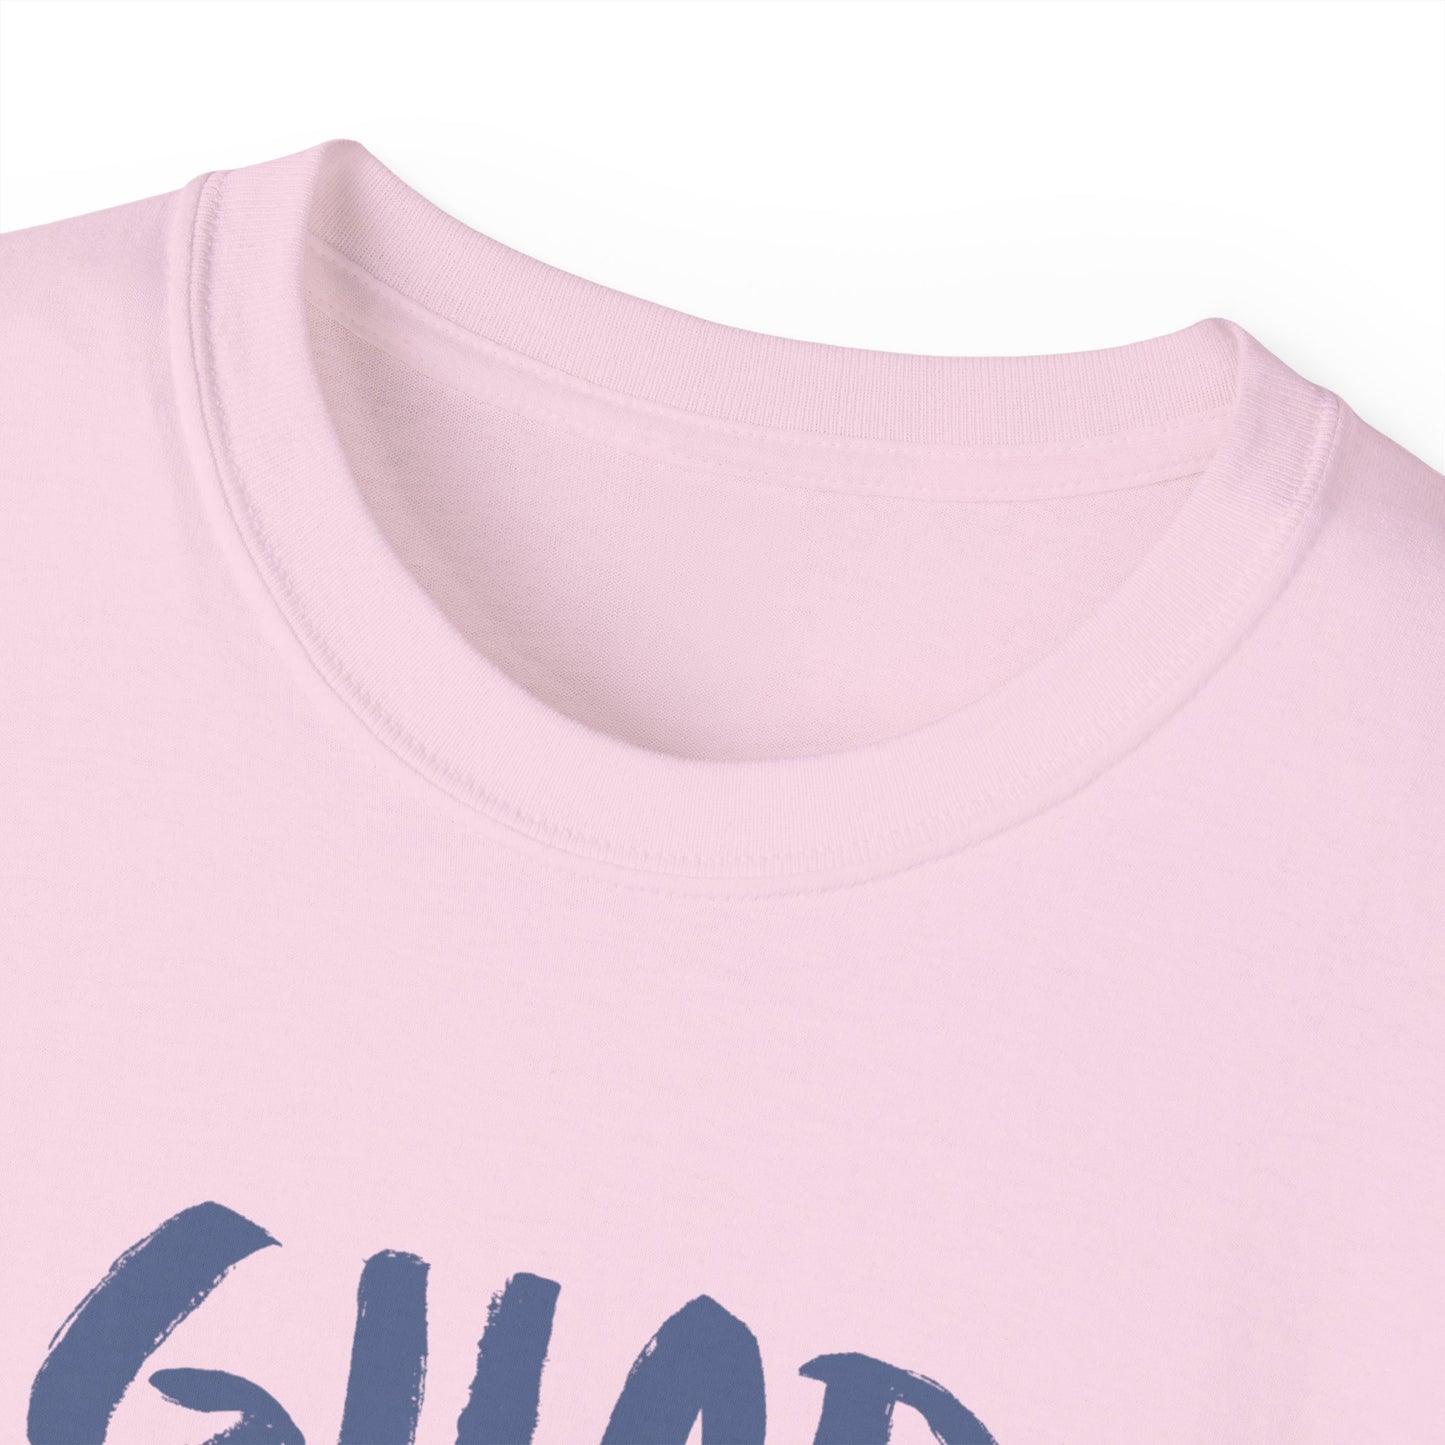 Gilad is My Personal Trainer | Unisex Ultra Cotton Tee